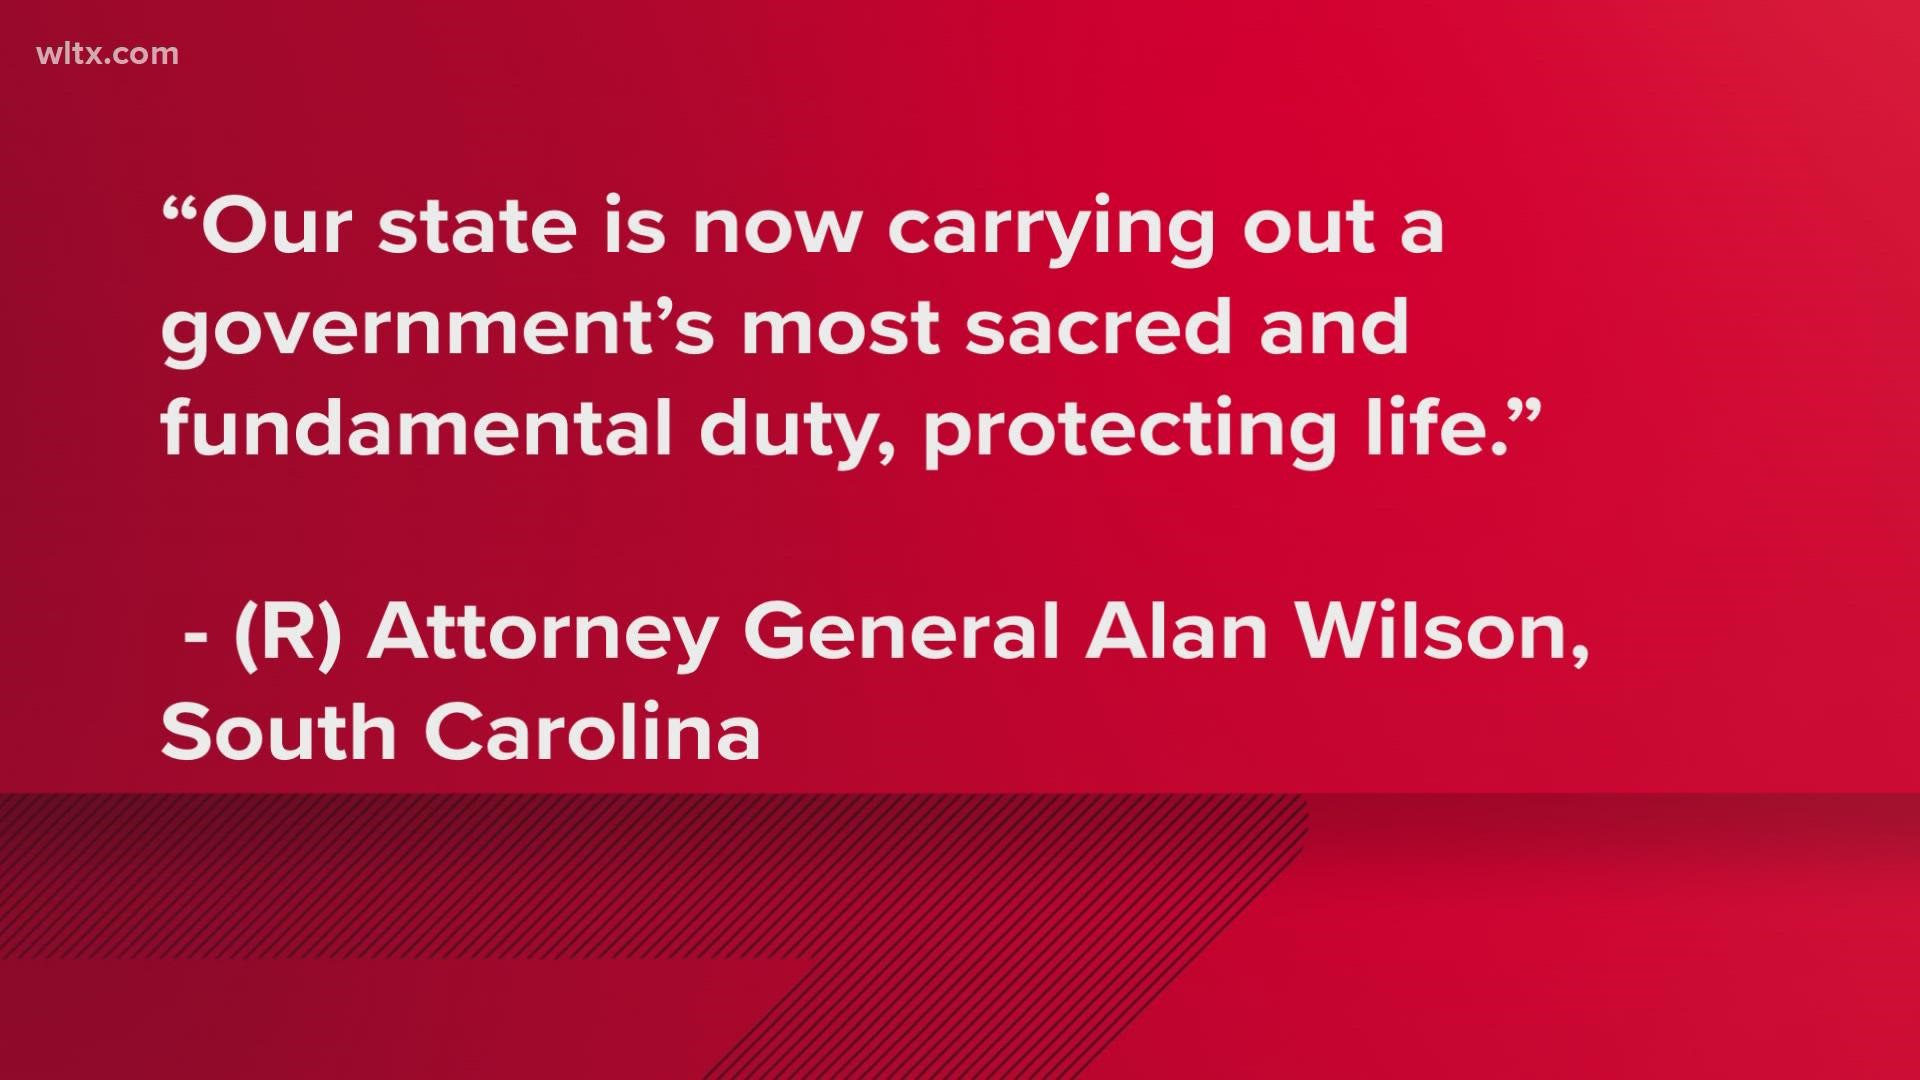 The South Carolina law bans abortion if a heartbeat is detected.